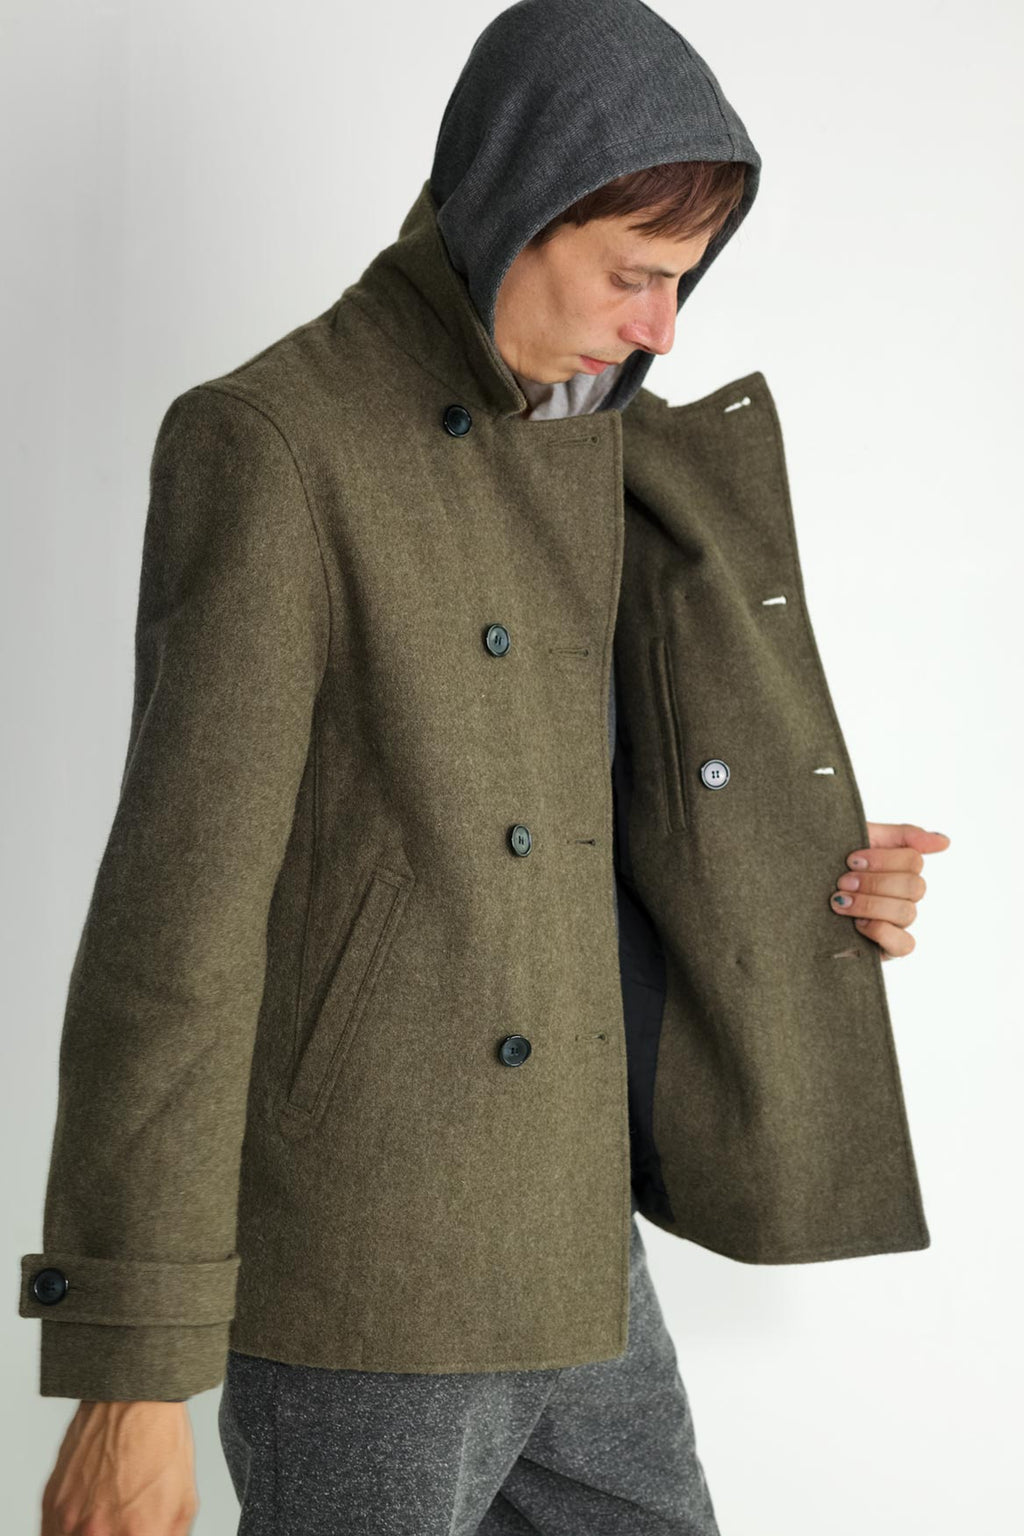 Japanese Loden Pea Coat in Army Green